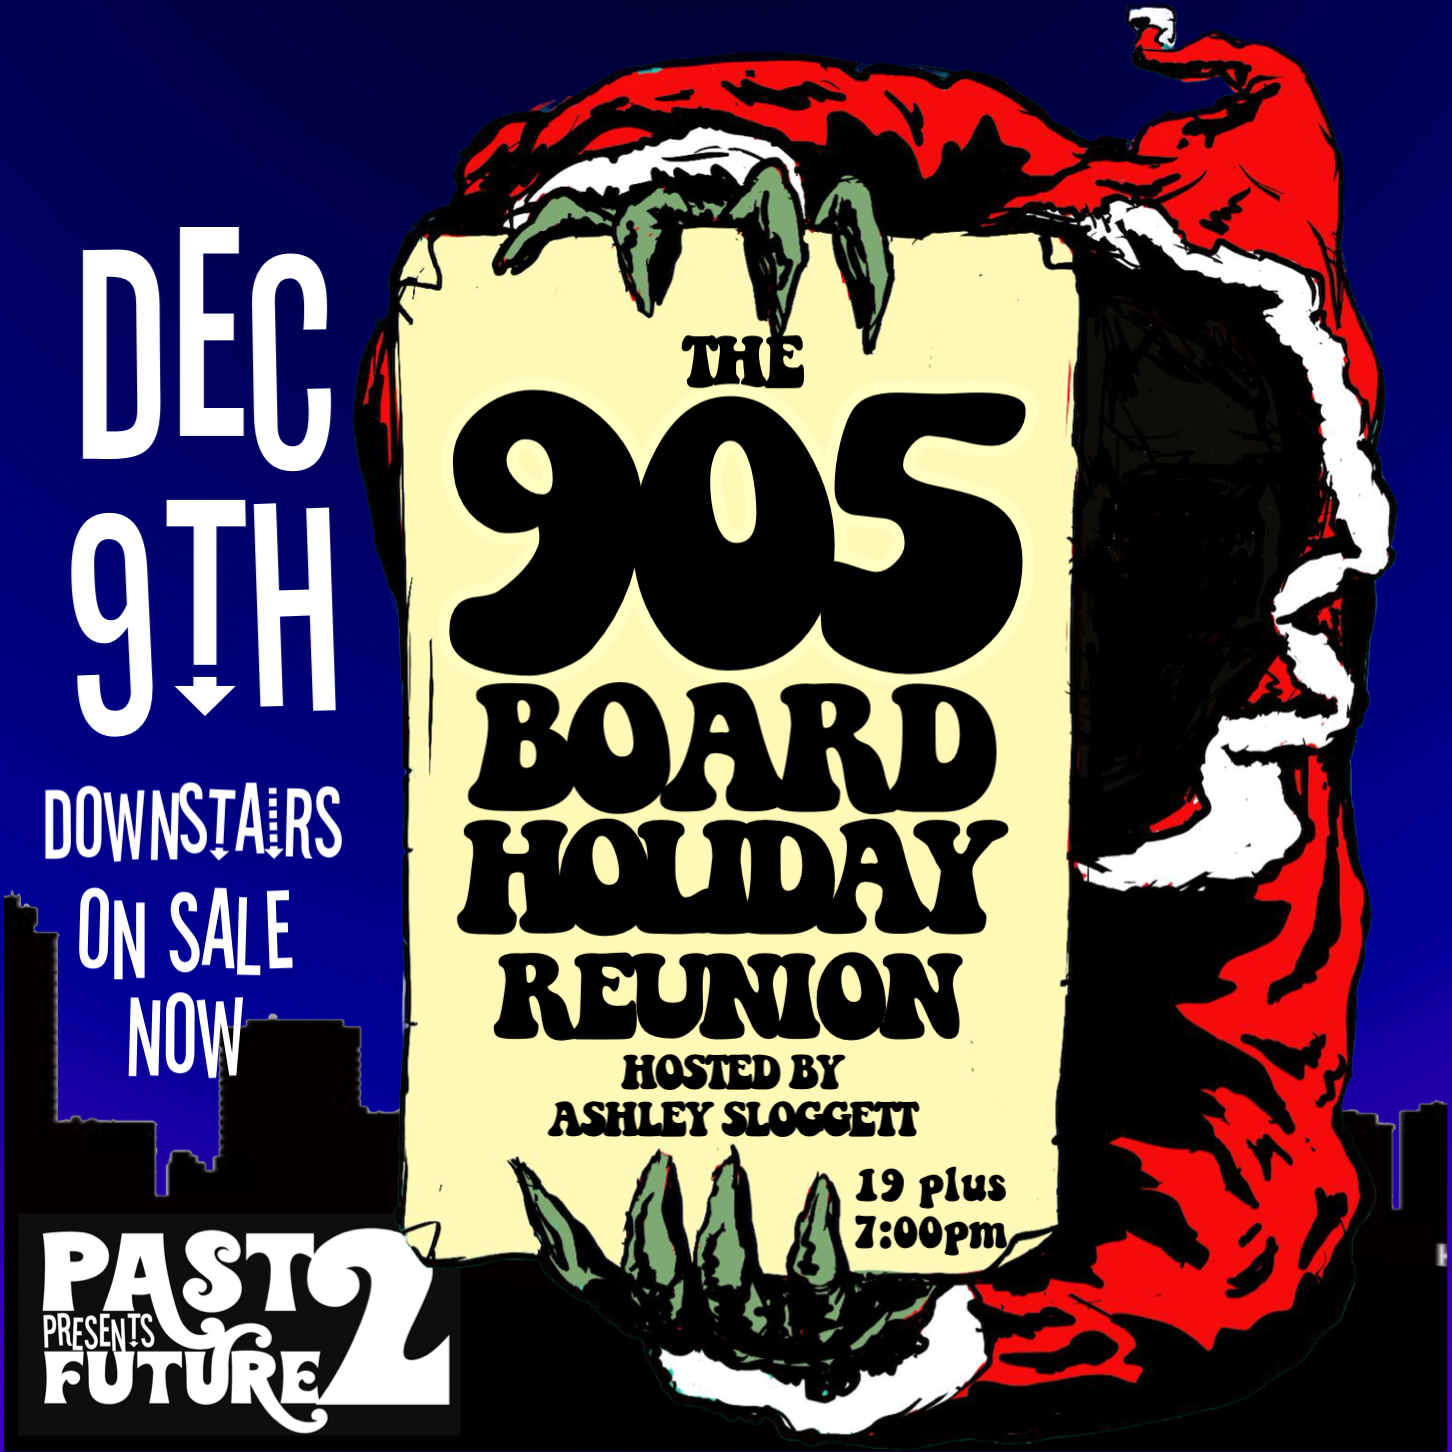 the 905 Board Holiday Reunion